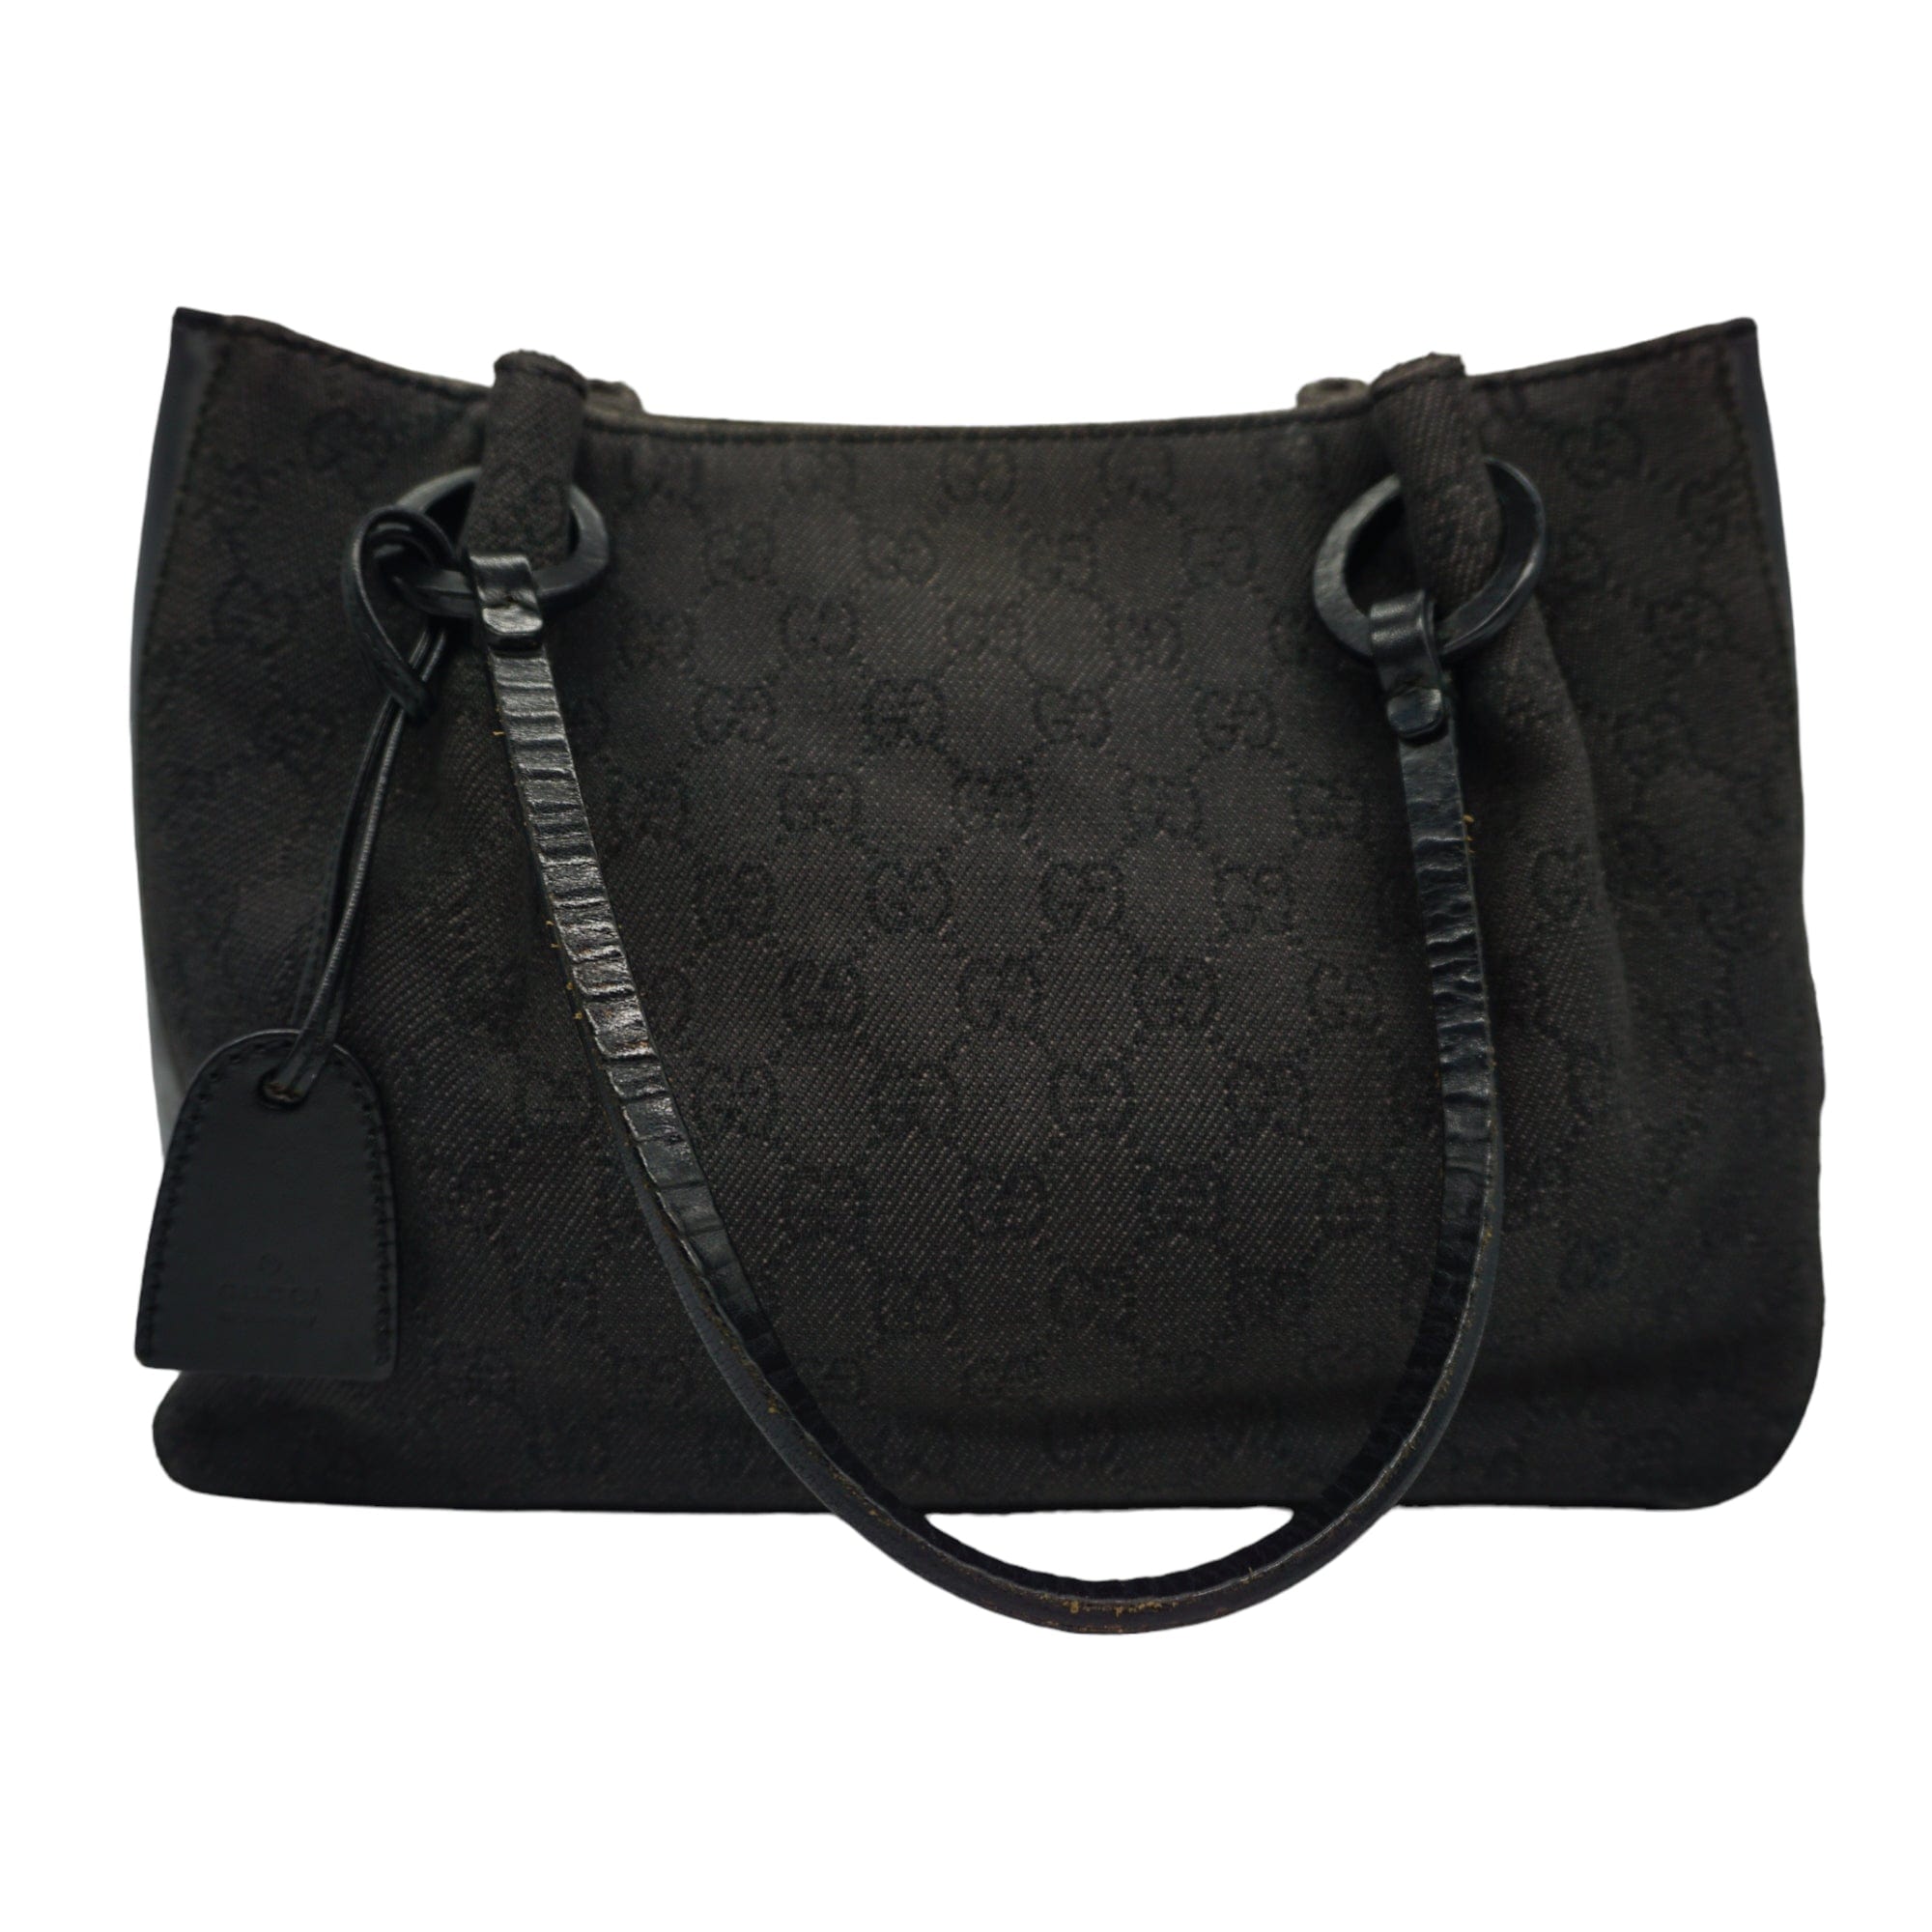 Aphrodite small shoulder bag in black leather | GUCCI® US